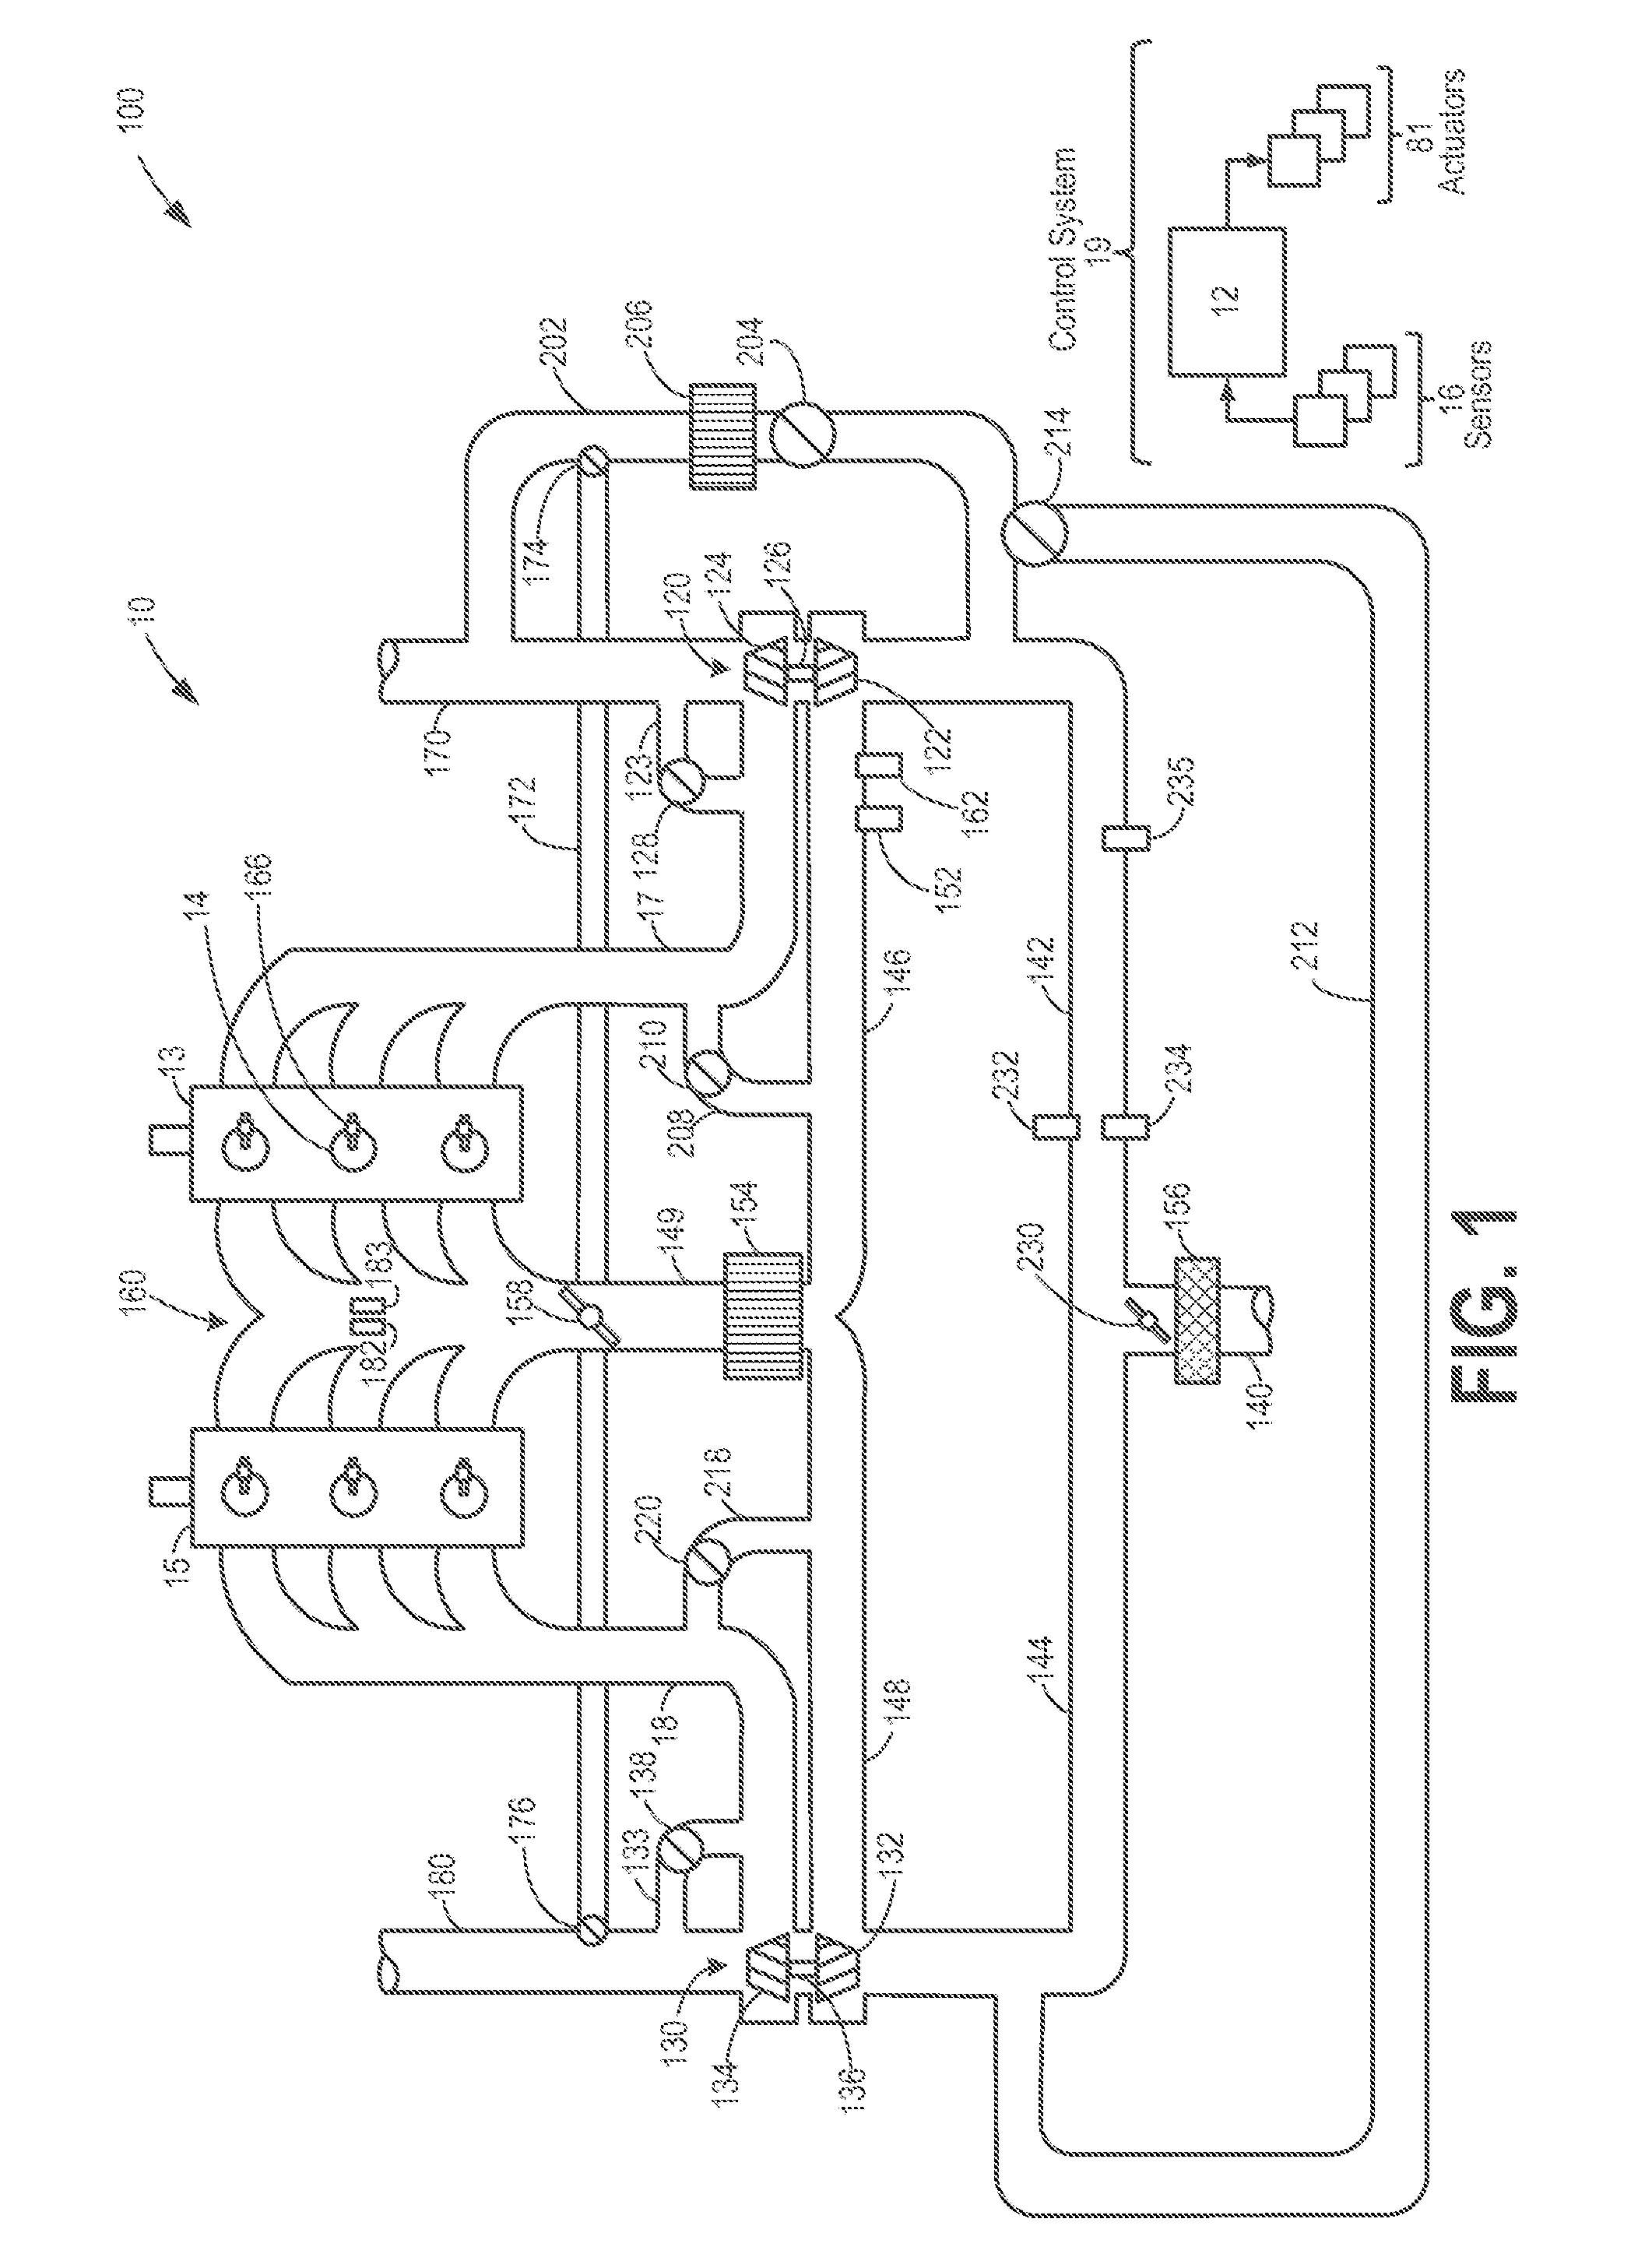 Method and system for exhaust gas recirculation